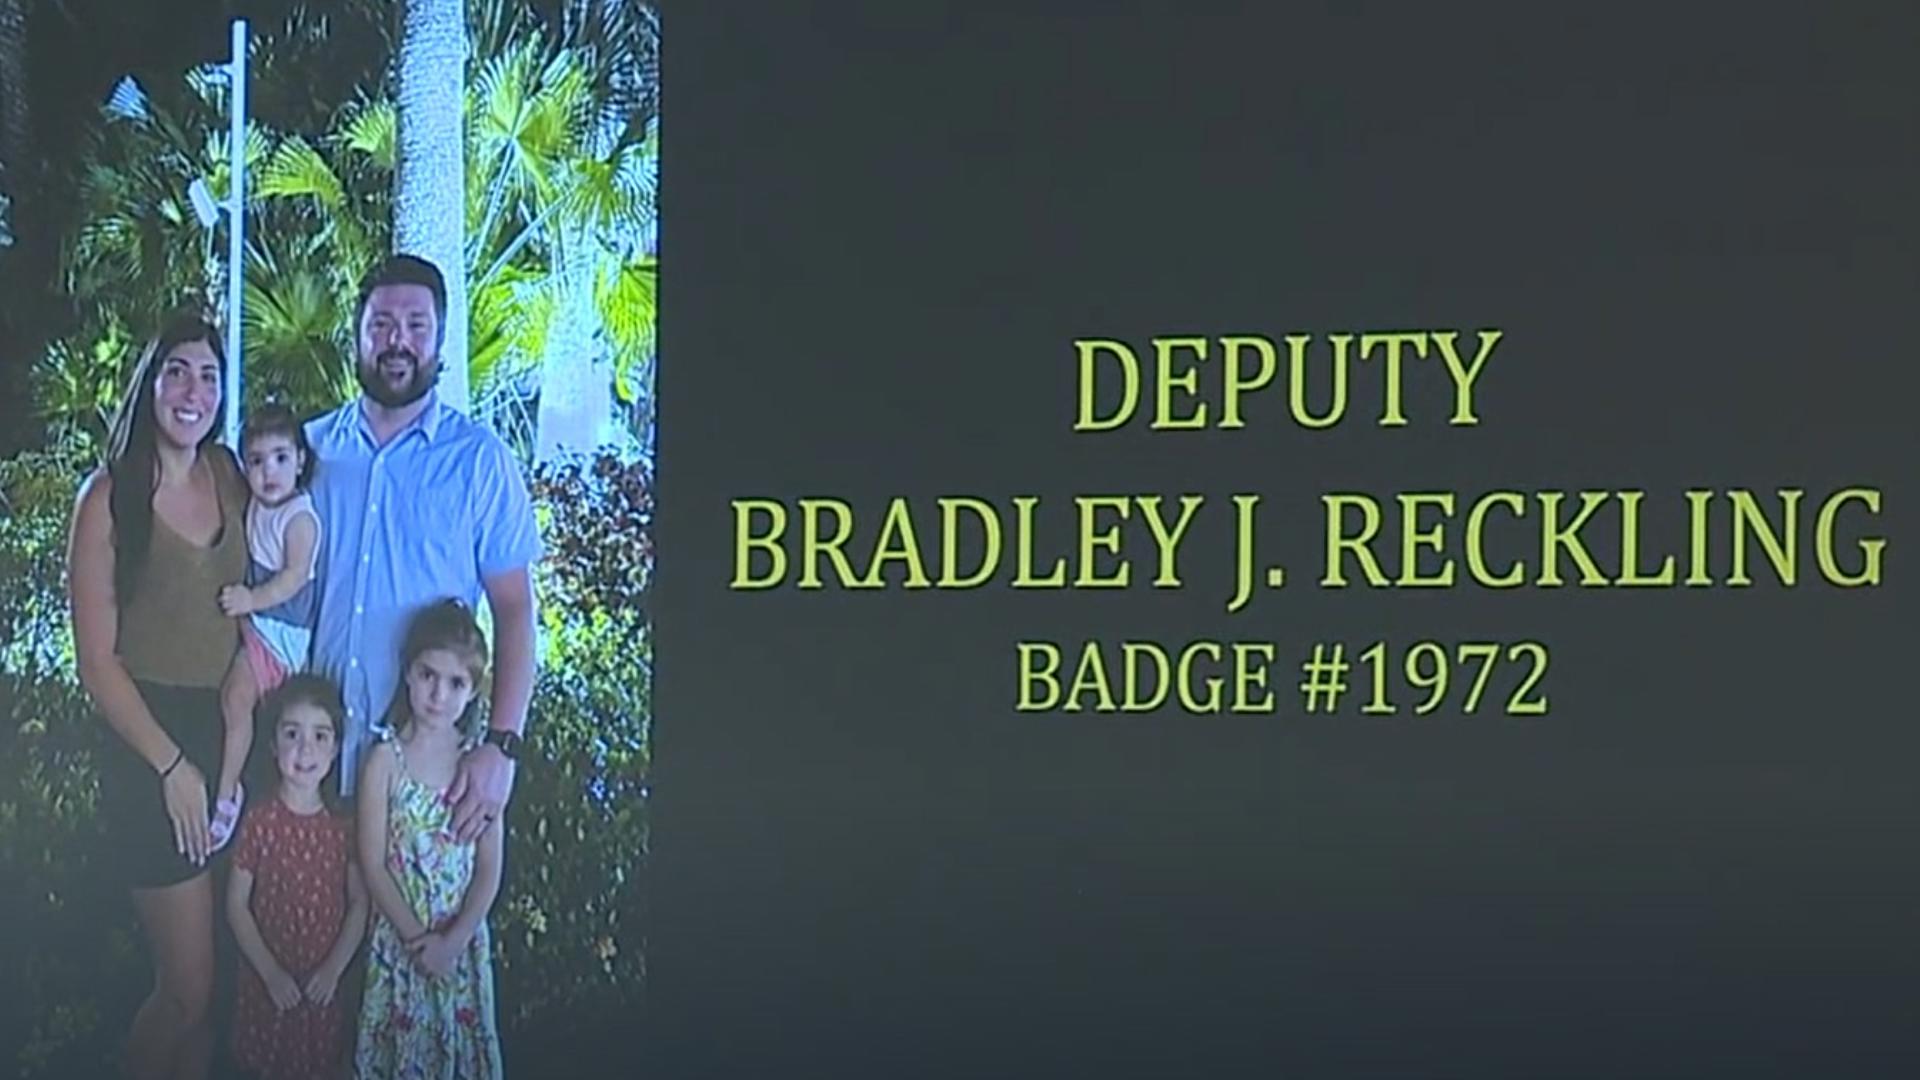 Deputy Bradley Reckling was married and a father of three children ages 5, 4 and 1, with a fourth child on the way.